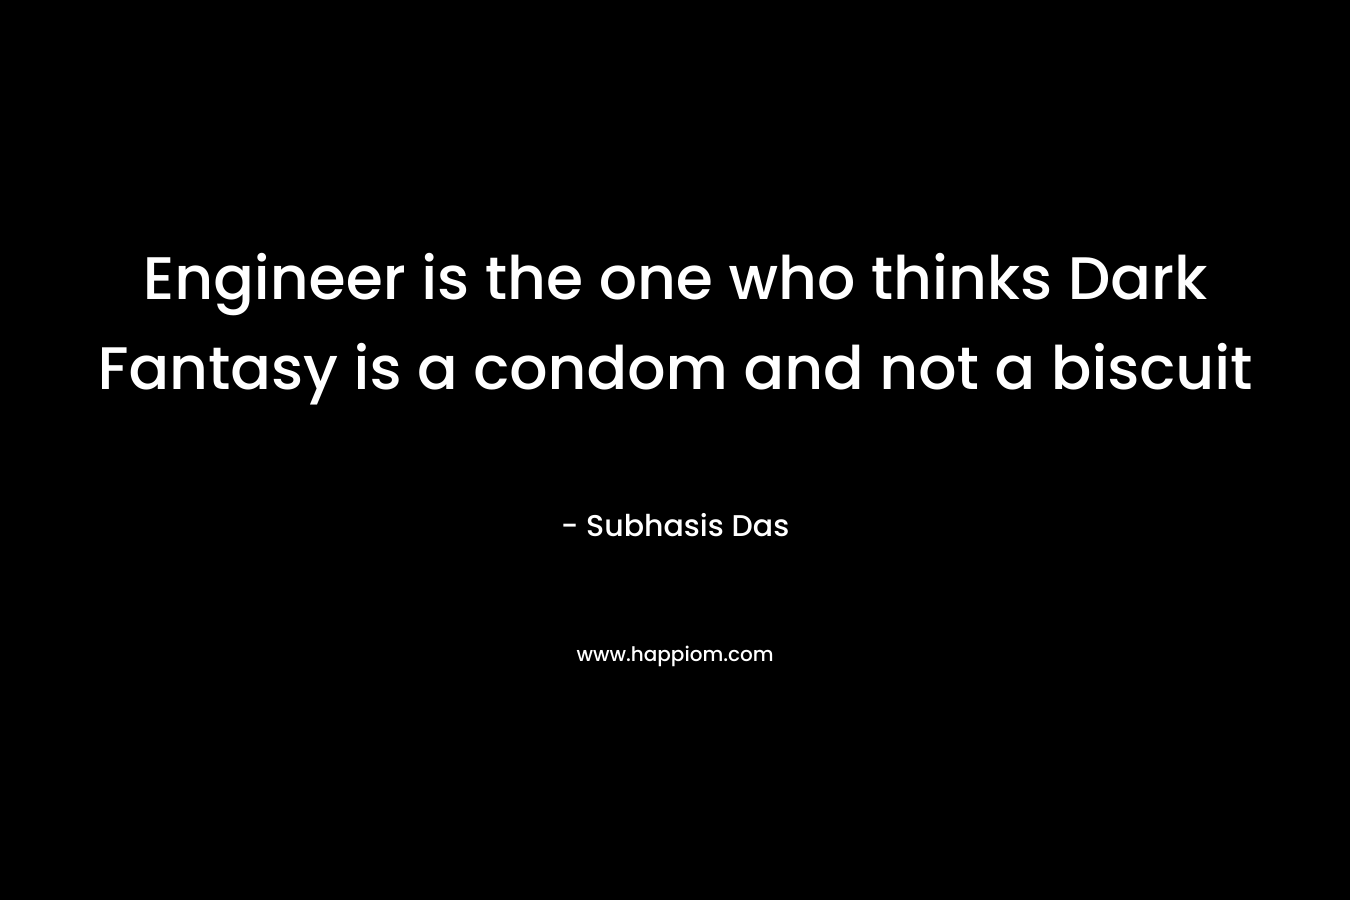 Engineer is the one who thinks Dark Fantasy is a condom and not a biscuit